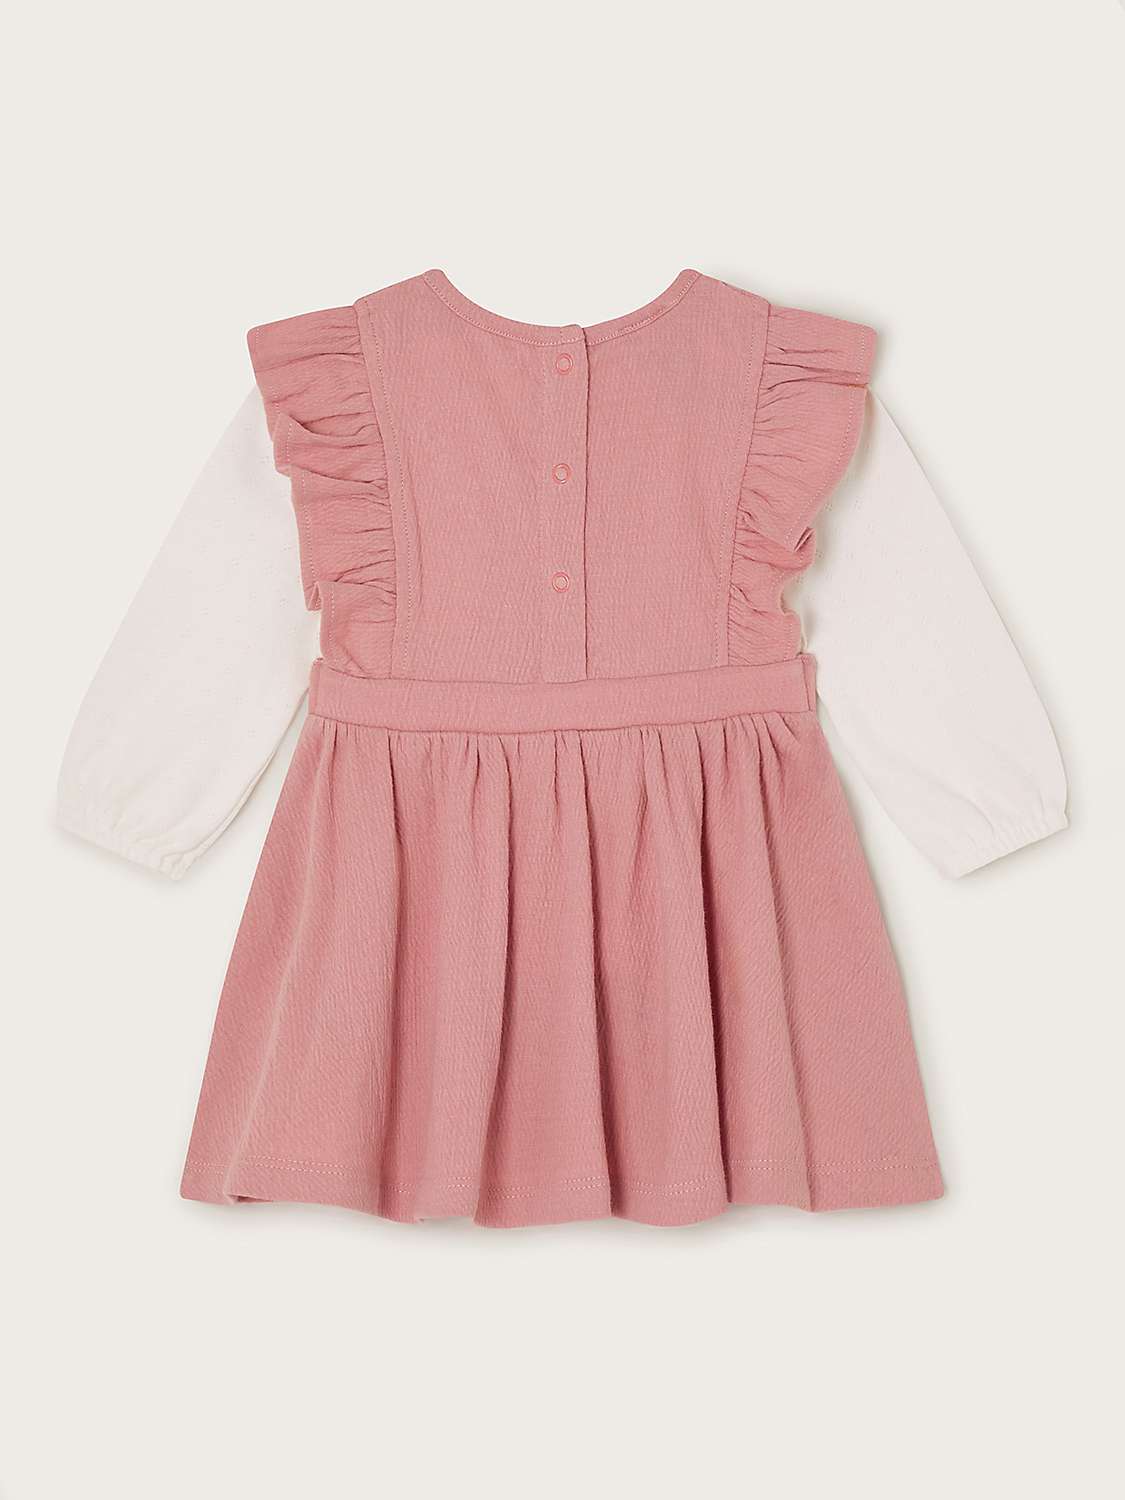 Buy Monsoon Baby Top And Dress Set, Pink Online at johnlewis.com